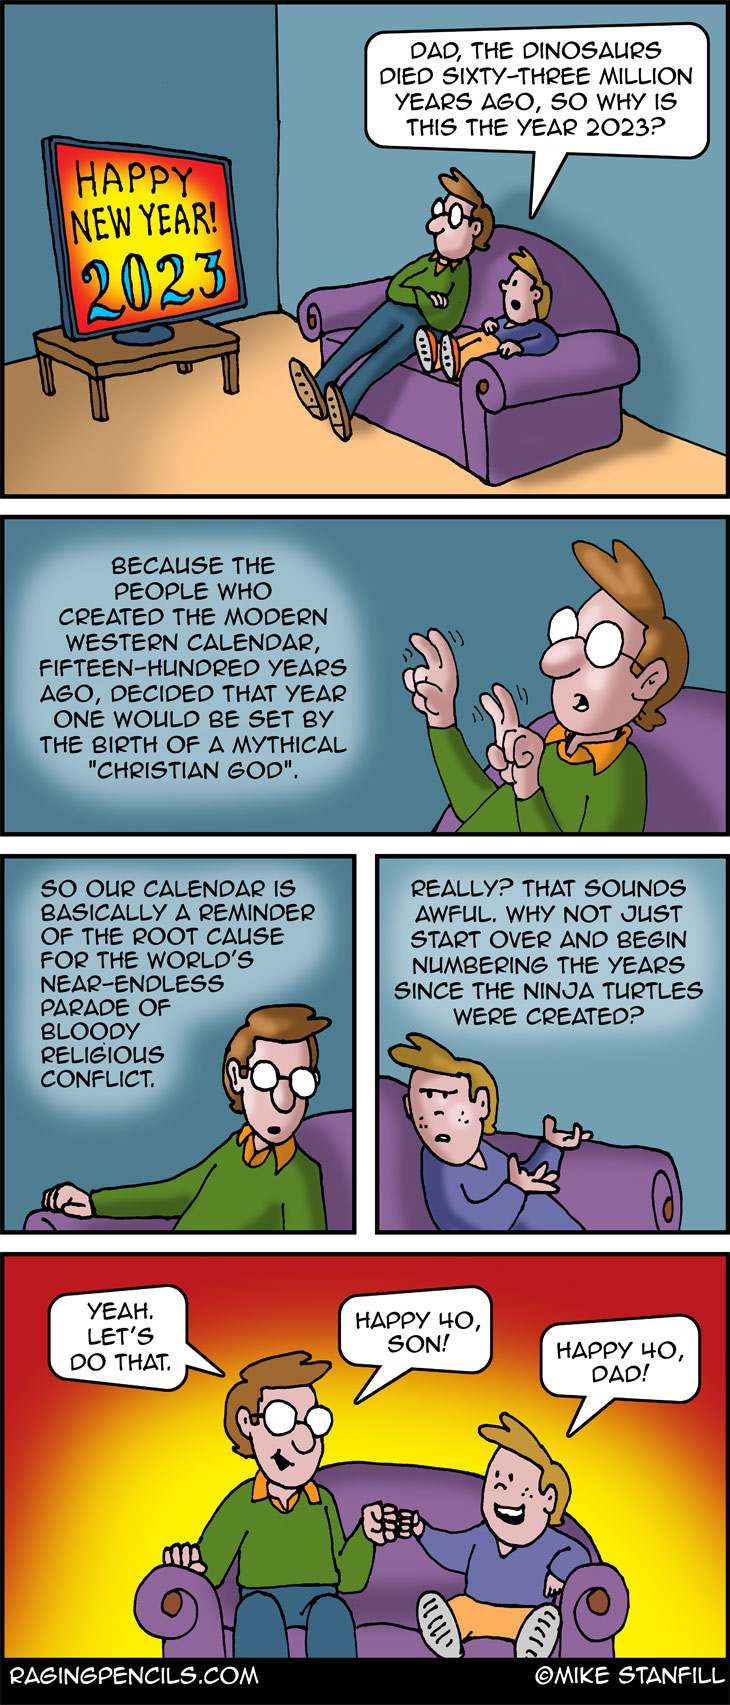 The progressive editorial cartoon about the creation of the modern calendar.